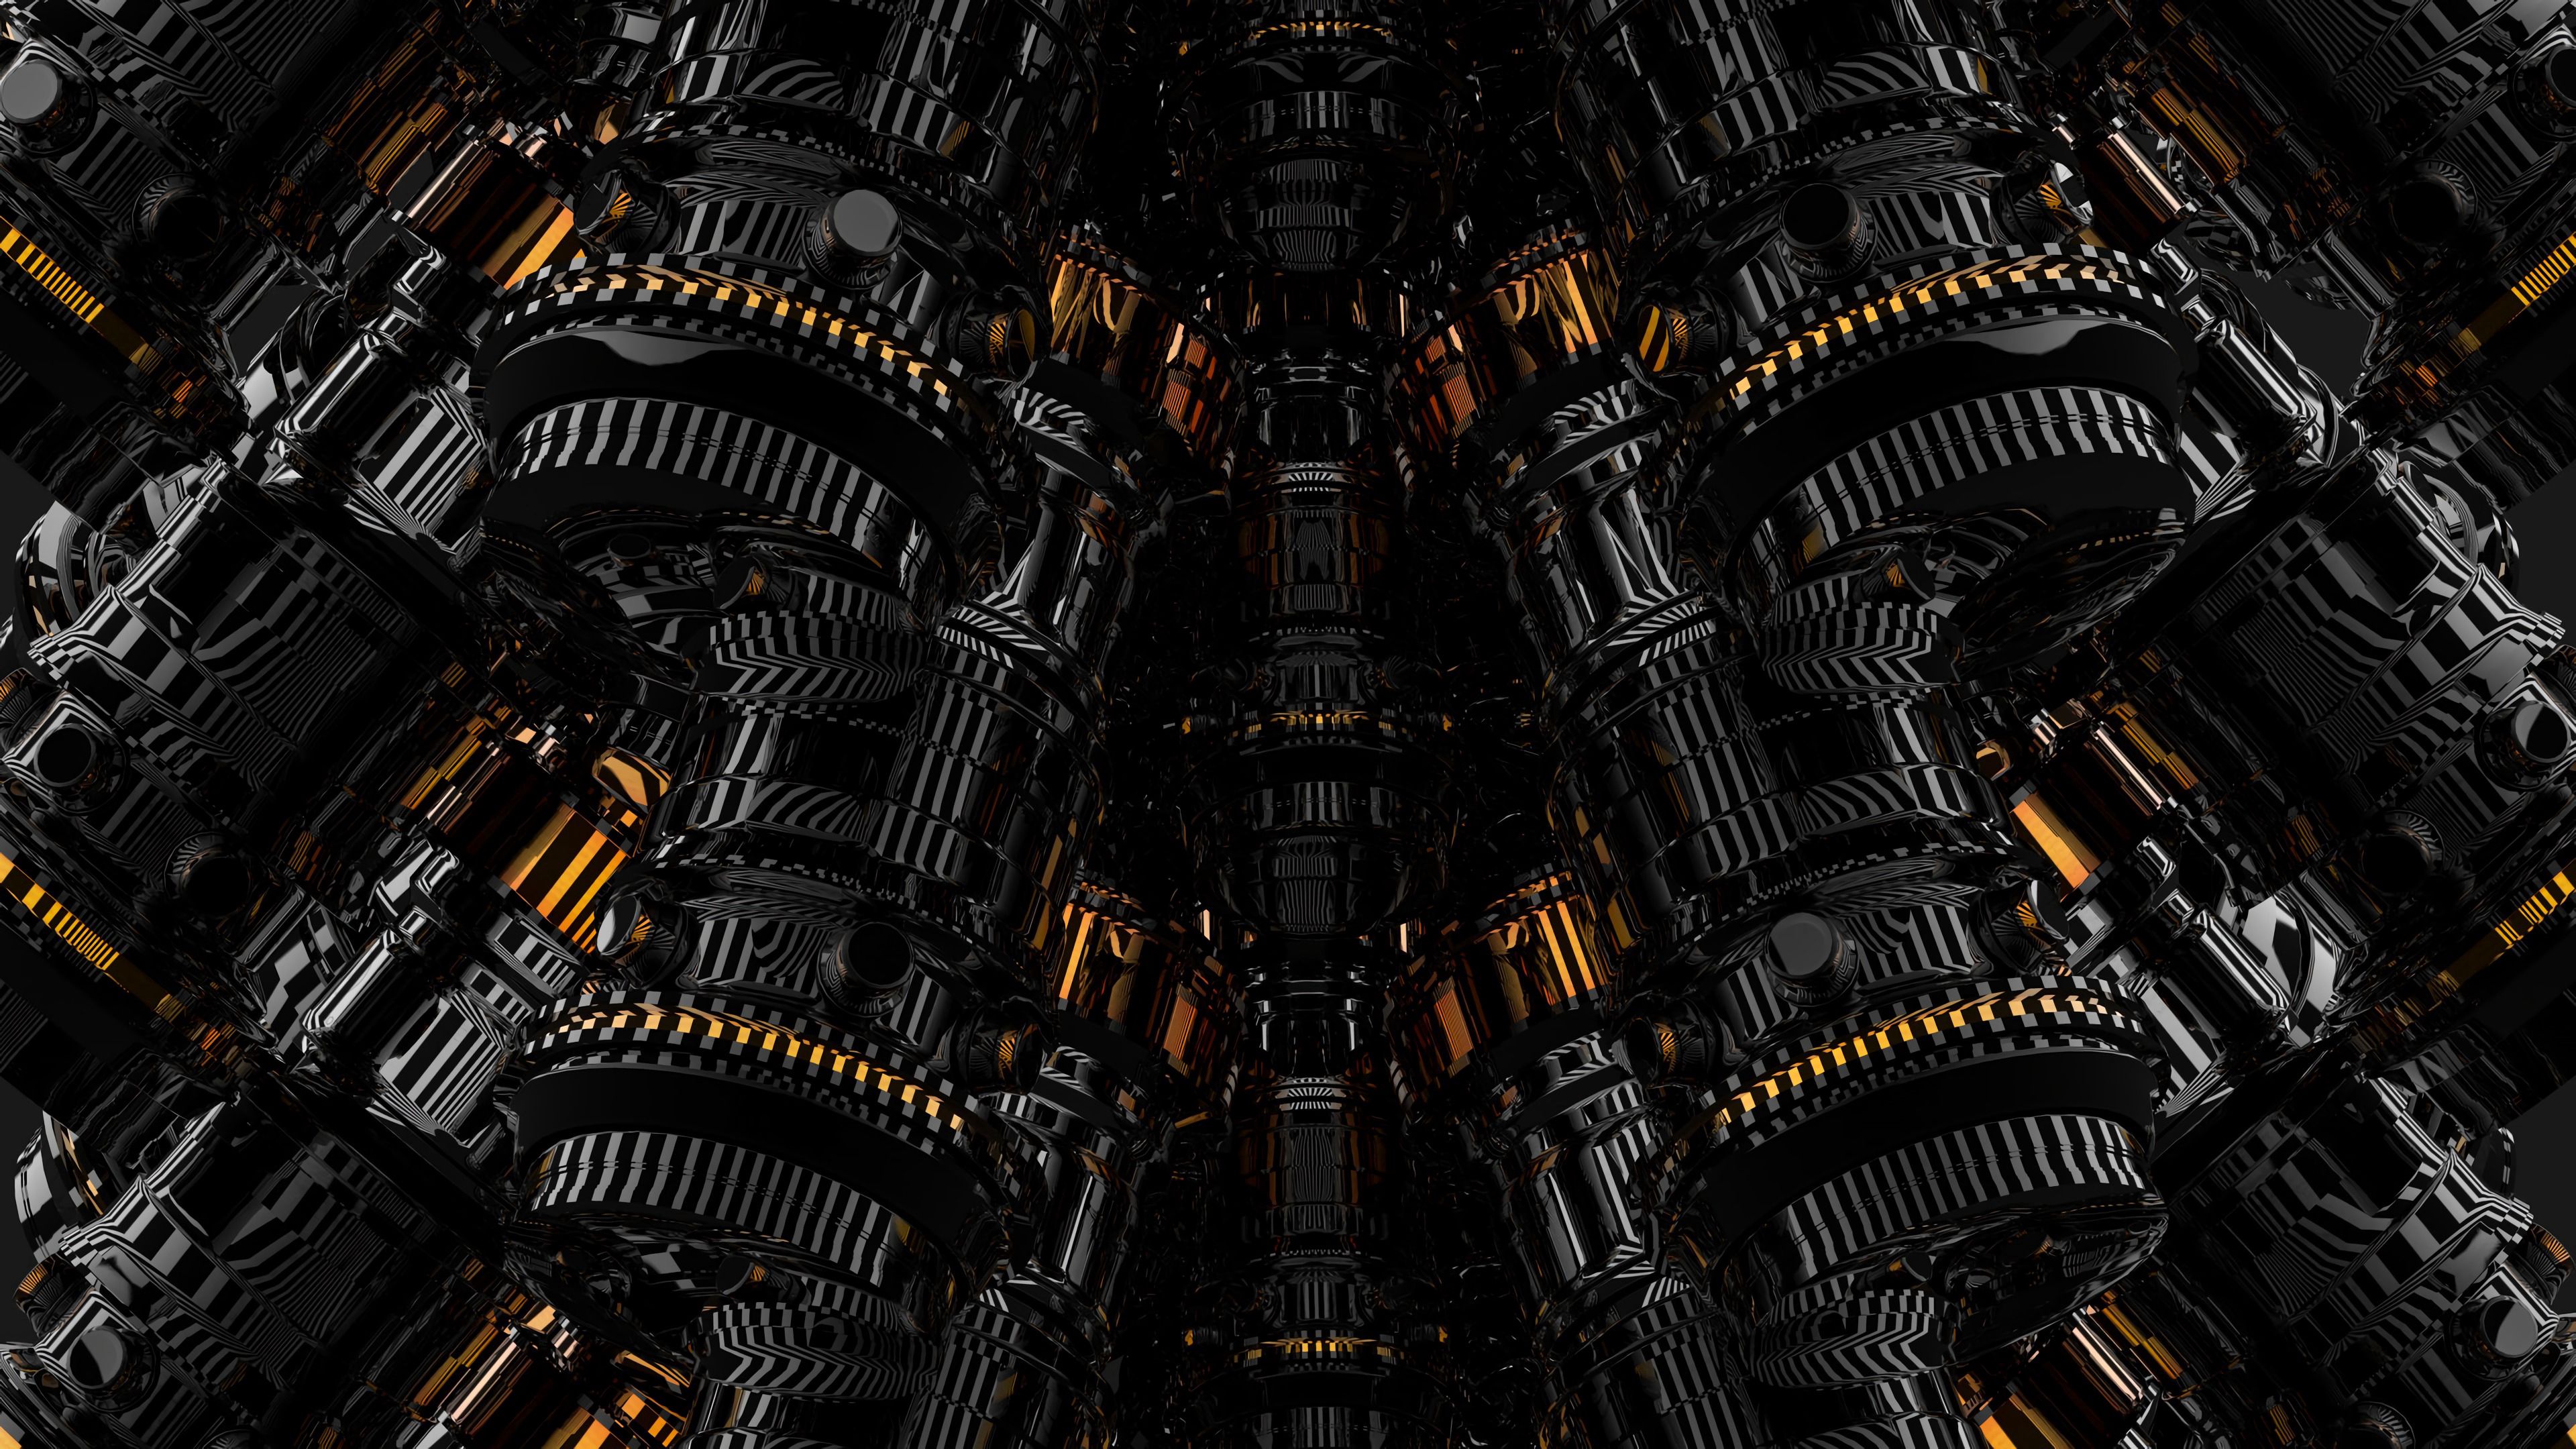 147382 download wallpaper 3d, black, dark, structure, design, construction, mechanism screensavers and pictures for free